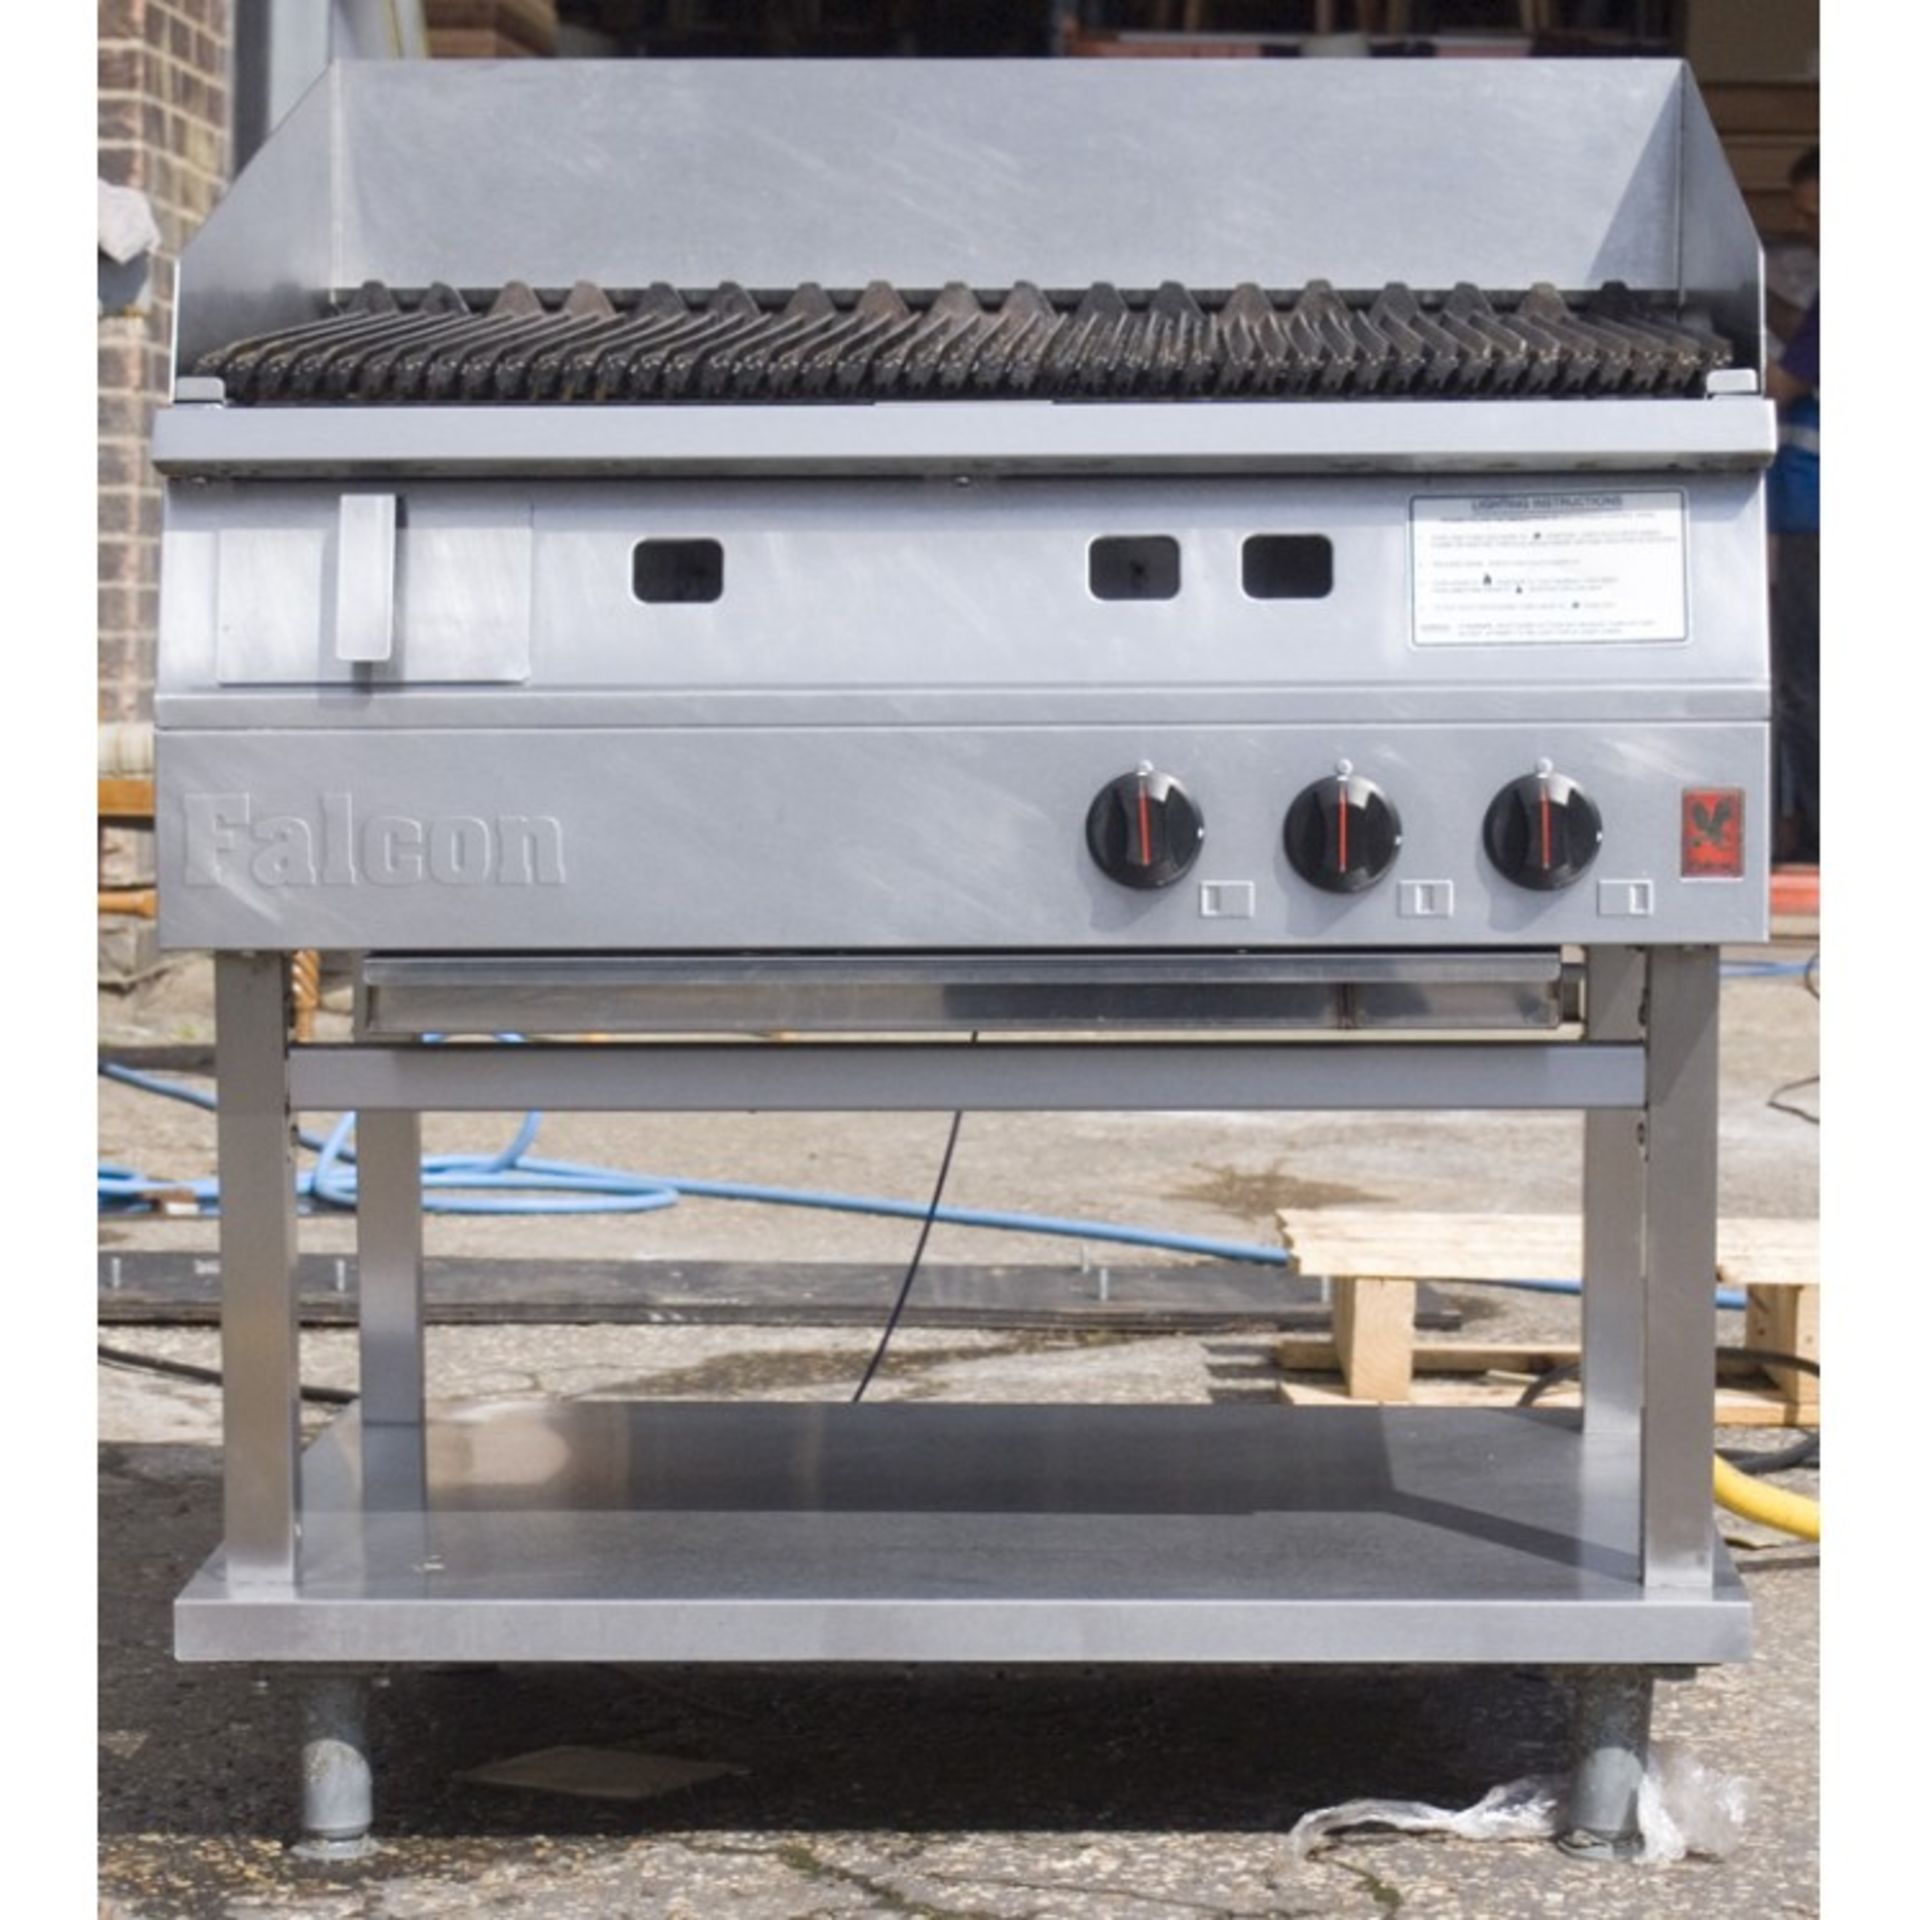 1 x  Falcon Griddle - Like New

Falcon Griddle with stainless steel stand and shelf. You will find - Image 7 of 7